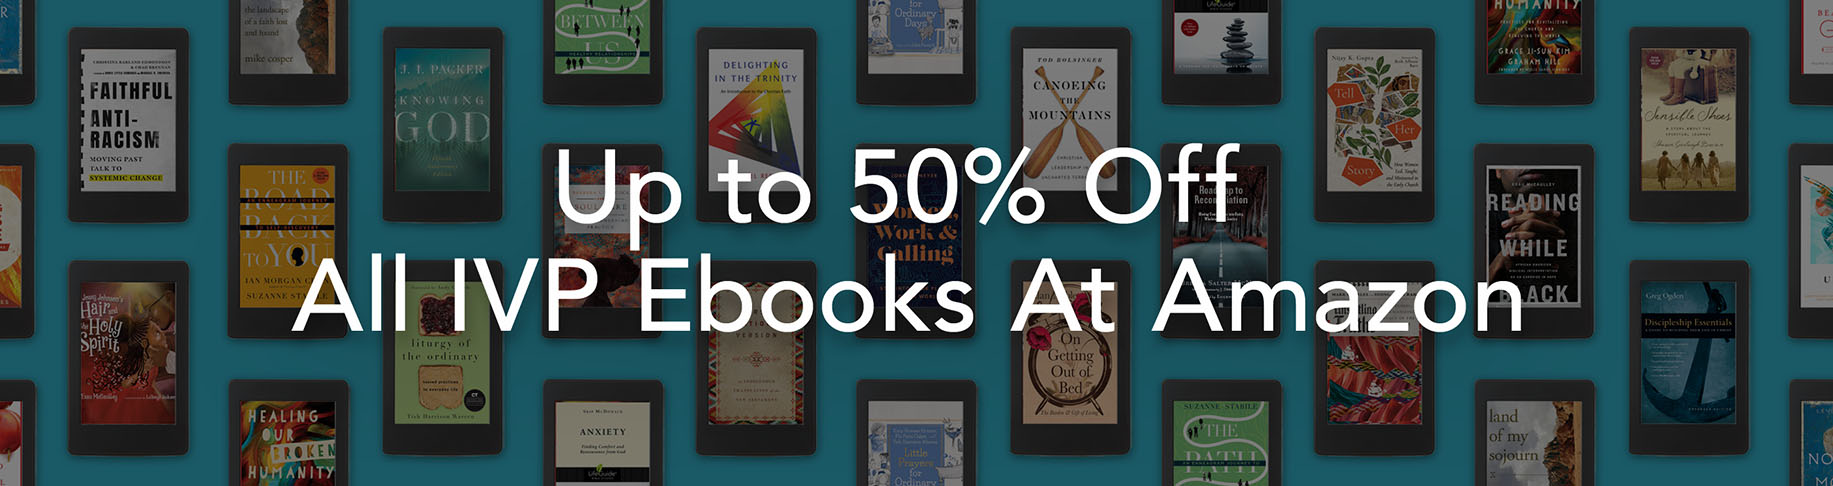 50% Off All IVP Ebooks at Amazon